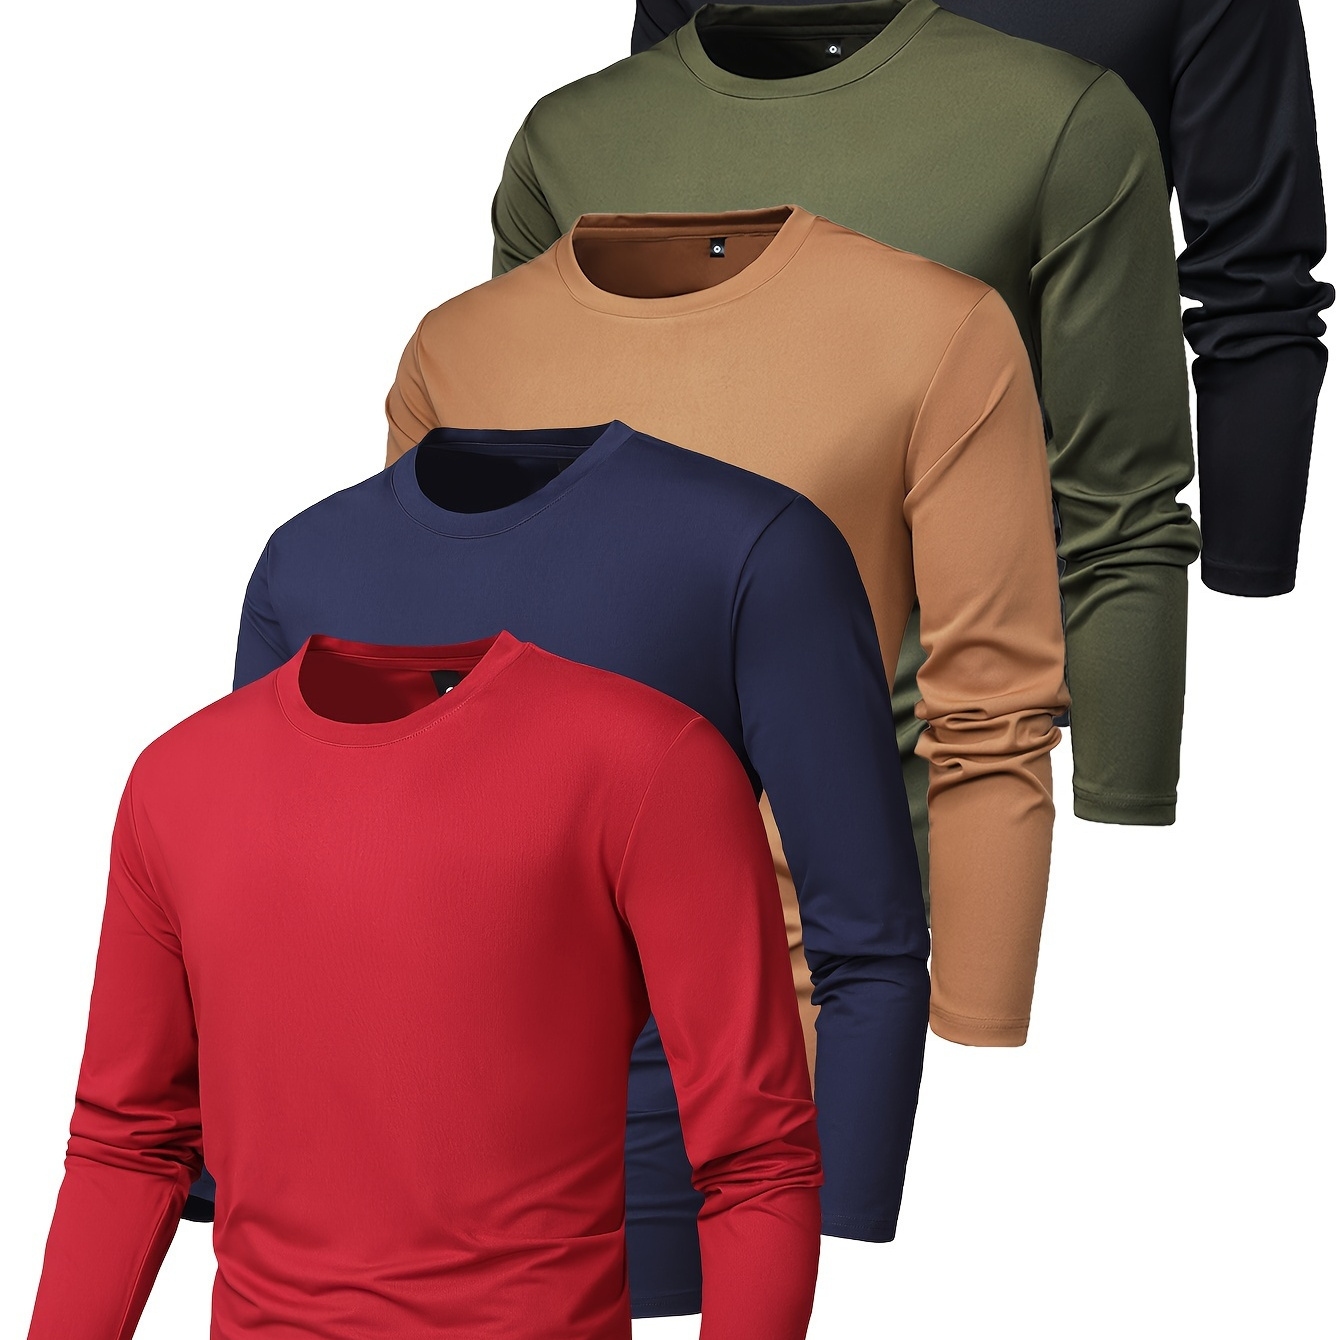 

Men's 5pcs Set Of Solid Color Crew Neck Long Sleeve T-shirts, Casual And Chic Sports Tops For Spring And Autumn Jogging Fitness And Outdoors Sports Wear